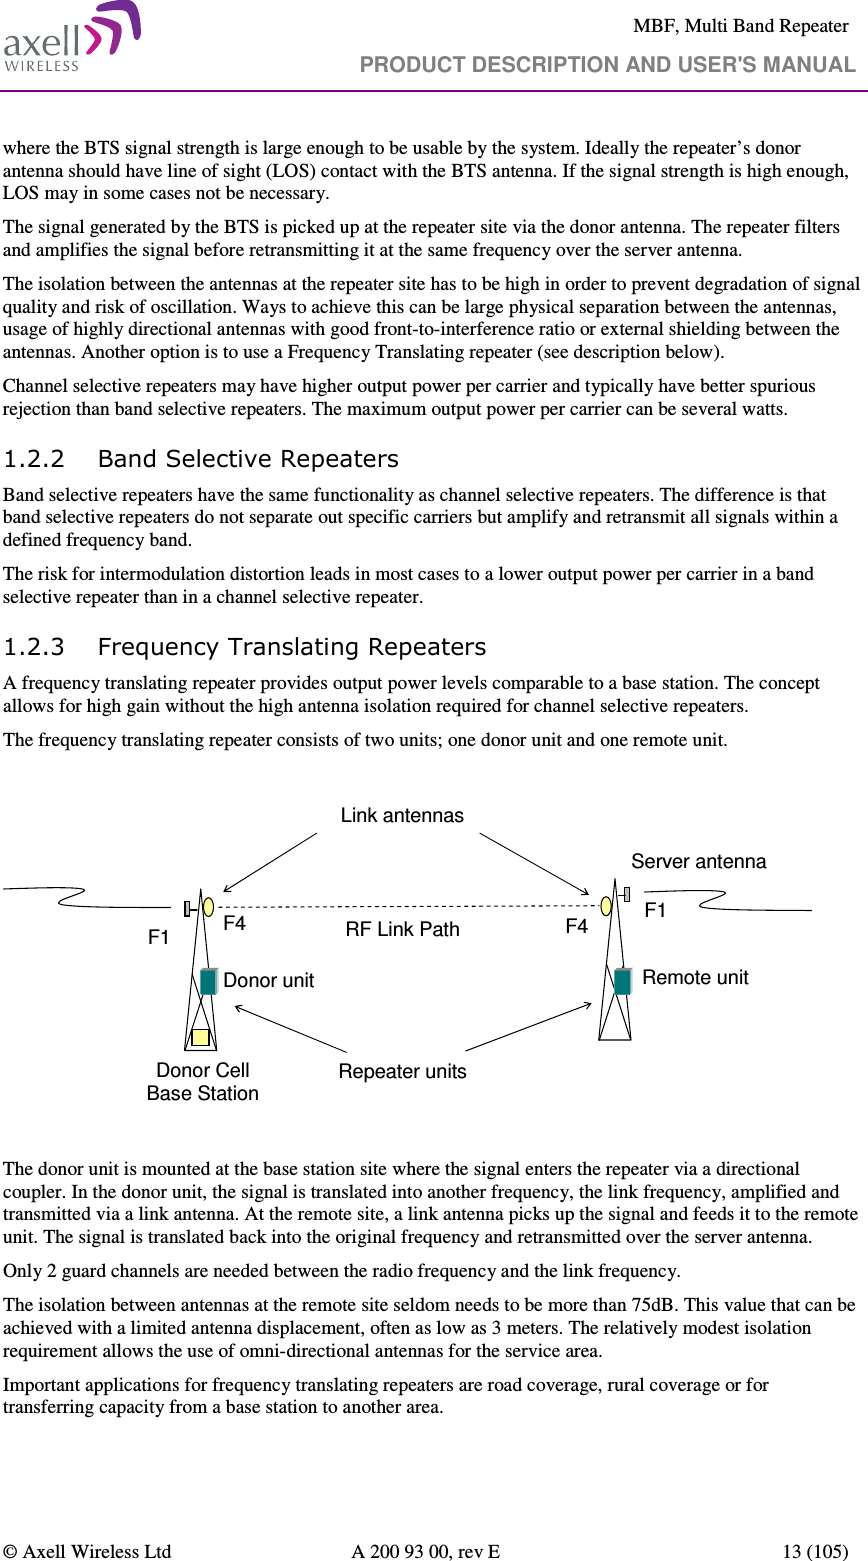     MBF, Multi Band Repeater                                     PRODUCT DESCRIPTION AND USER&apos;S MANUAL   © Axell Wireless Ltd  A 200 93 00, rev E  13 (105)  where the BTS signal strength is large enough to be usable by the system. Ideally the repeater’s donor antenna should have line of sight (LOS) contact with the BTS antenna. If the signal strength is high enough, LOS may in some cases not be necessary. The signal generated by the BTS is picked up at the repeater site via the donor antenna. The repeater filters and amplifies the signal before retransmitting it at the same frequency over the server antenna.  The isolation between the antennas at the repeater site has to be high in order to prevent degradation of signal quality and risk of oscillation. Ways to achieve this can be large physical separation between the antennas, usage of highly directional antennas with good front-to-interference ratio or external shielding between the antennas. Another option is to use a Frequency Translating repeater (see description below). Channel selective repeaters may have higher output power per carrier and typically have better spurious rejection than band selective repeaters. The maximum output power per carrier can be several watts. 1.2.2 Band Selective Repeaters Band selective repeaters have the same functionality as channel selective repeaters. The difference is that band selective repeaters do not separate out specific carriers but amplify and retransmit all signals within a defined frequency band.  The risk for intermodulation distortion leads in most cases to a lower output power per carrier in a band selective repeater than in a channel selective repeater. 1.2.3 Frequency Translating Repeaters A frequency translating repeater provides output power levels comparable to a base station. The concept allows for high gain without the high antenna isolation required for channel selective repeaters. The frequency translating repeater consists of two units; one donor unit and one remote unit.  Donor Cell Base StationRemote unitServer antennaF4 F4 F1Donor unitRF Link PathF1Link antennasRepeater units  The donor unit is mounted at the base station site where the signal enters the repeater via a directional coupler. In the donor unit, the signal is translated into another frequency, the link frequency, amplified and transmitted via a link antenna. At the remote site, a link antenna picks up the signal and feeds it to the remote unit. The signal is translated back into the original frequency and retransmitted over the server antenna.  Only 2 guard channels are needed between the radio frequency and the link frequency.  The isolation between antennas at the remote site seldom needs to be more than 75dB. This value that can be achieved with a limited antenna displacement, often as low as 3 meters. The relatively modest isolation requirement allows the use of omni-directional antennas for the service area. Important applications for frequency translating repeaters are road coverage, rural coverage or for transferring capacity from a base station to another area. 